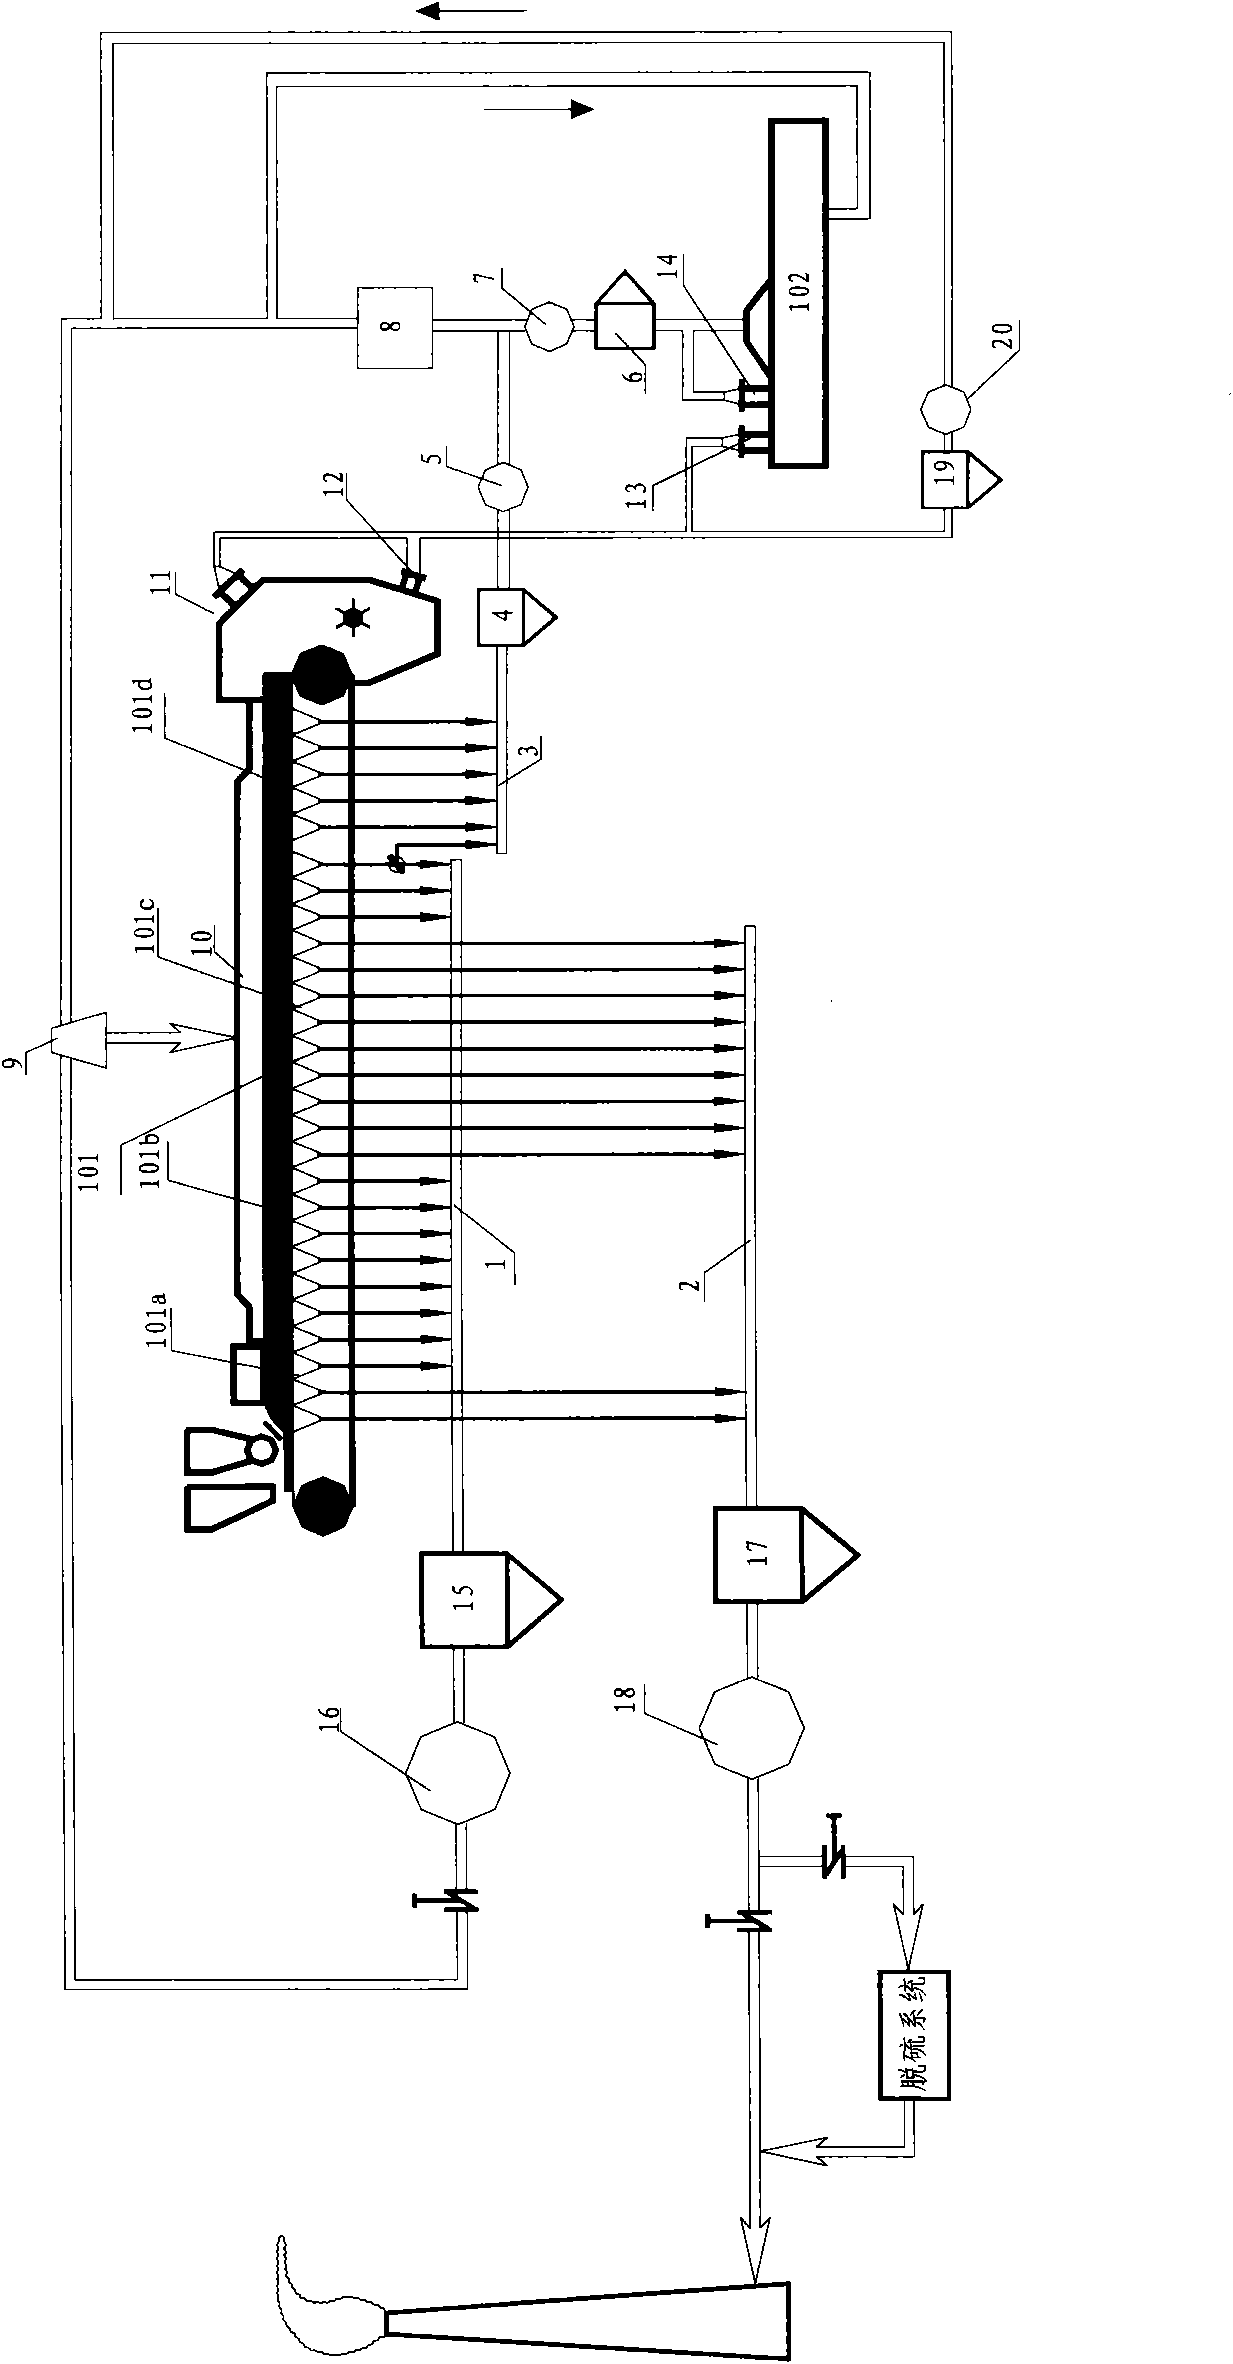 Method for treating smoke generated by sintering ore materials